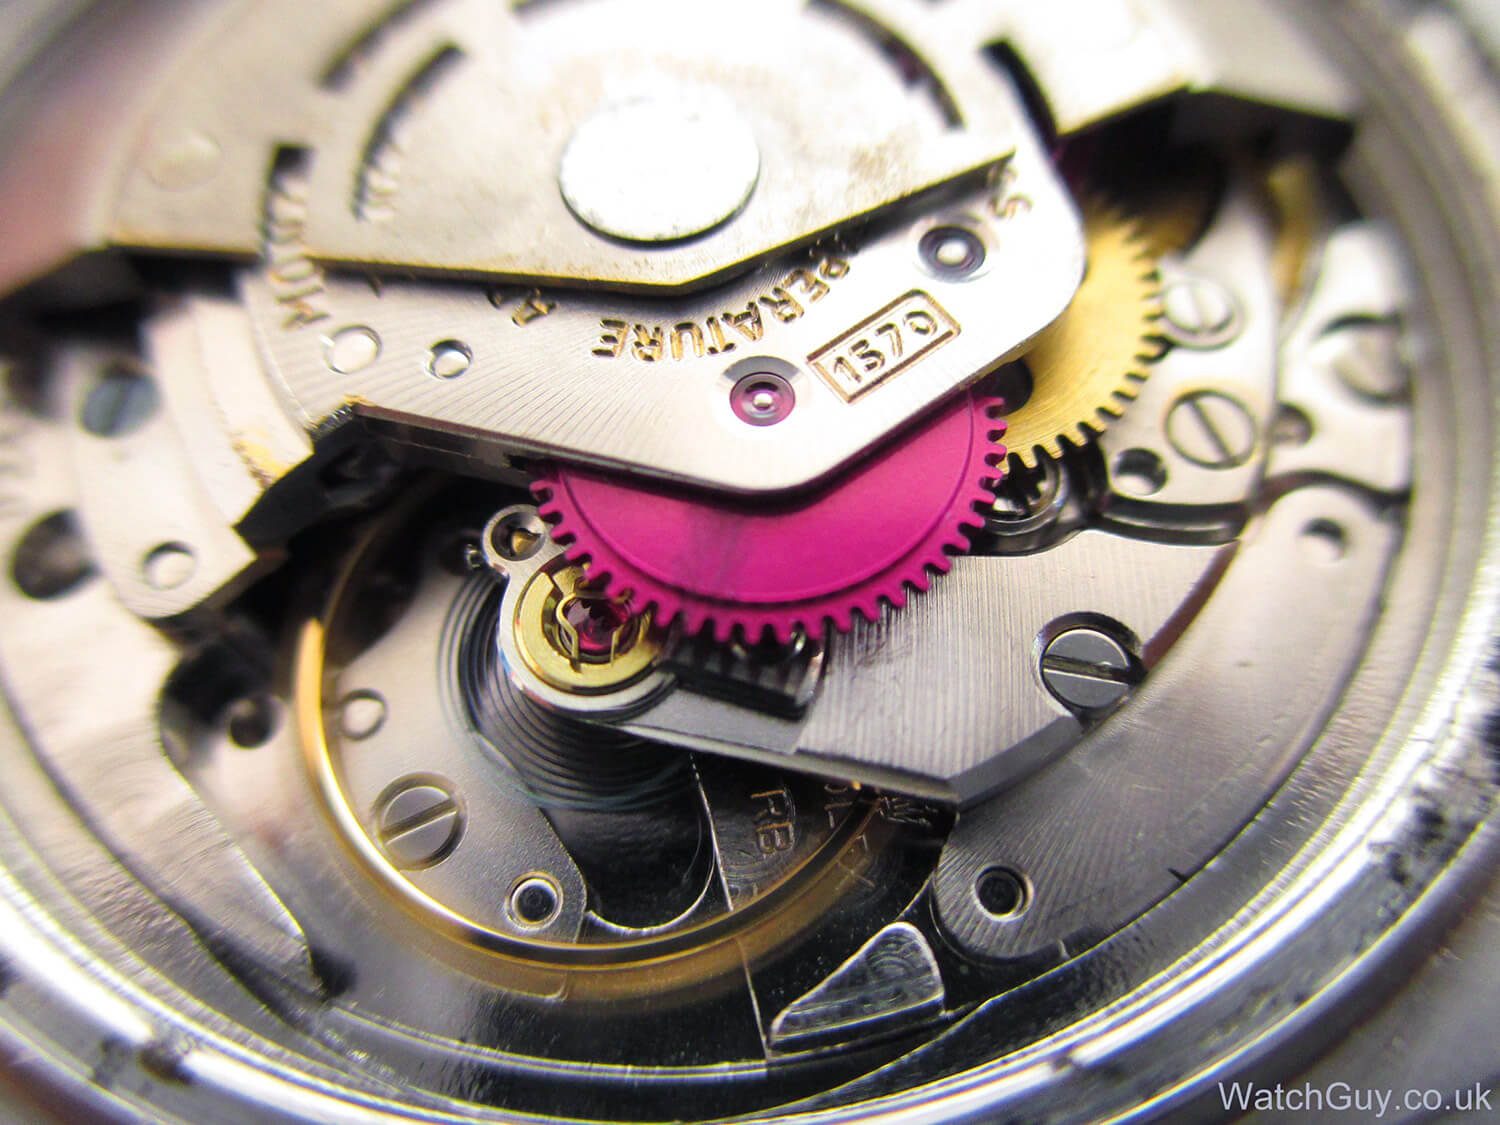 Rolex Caliber 1570 balance from the back